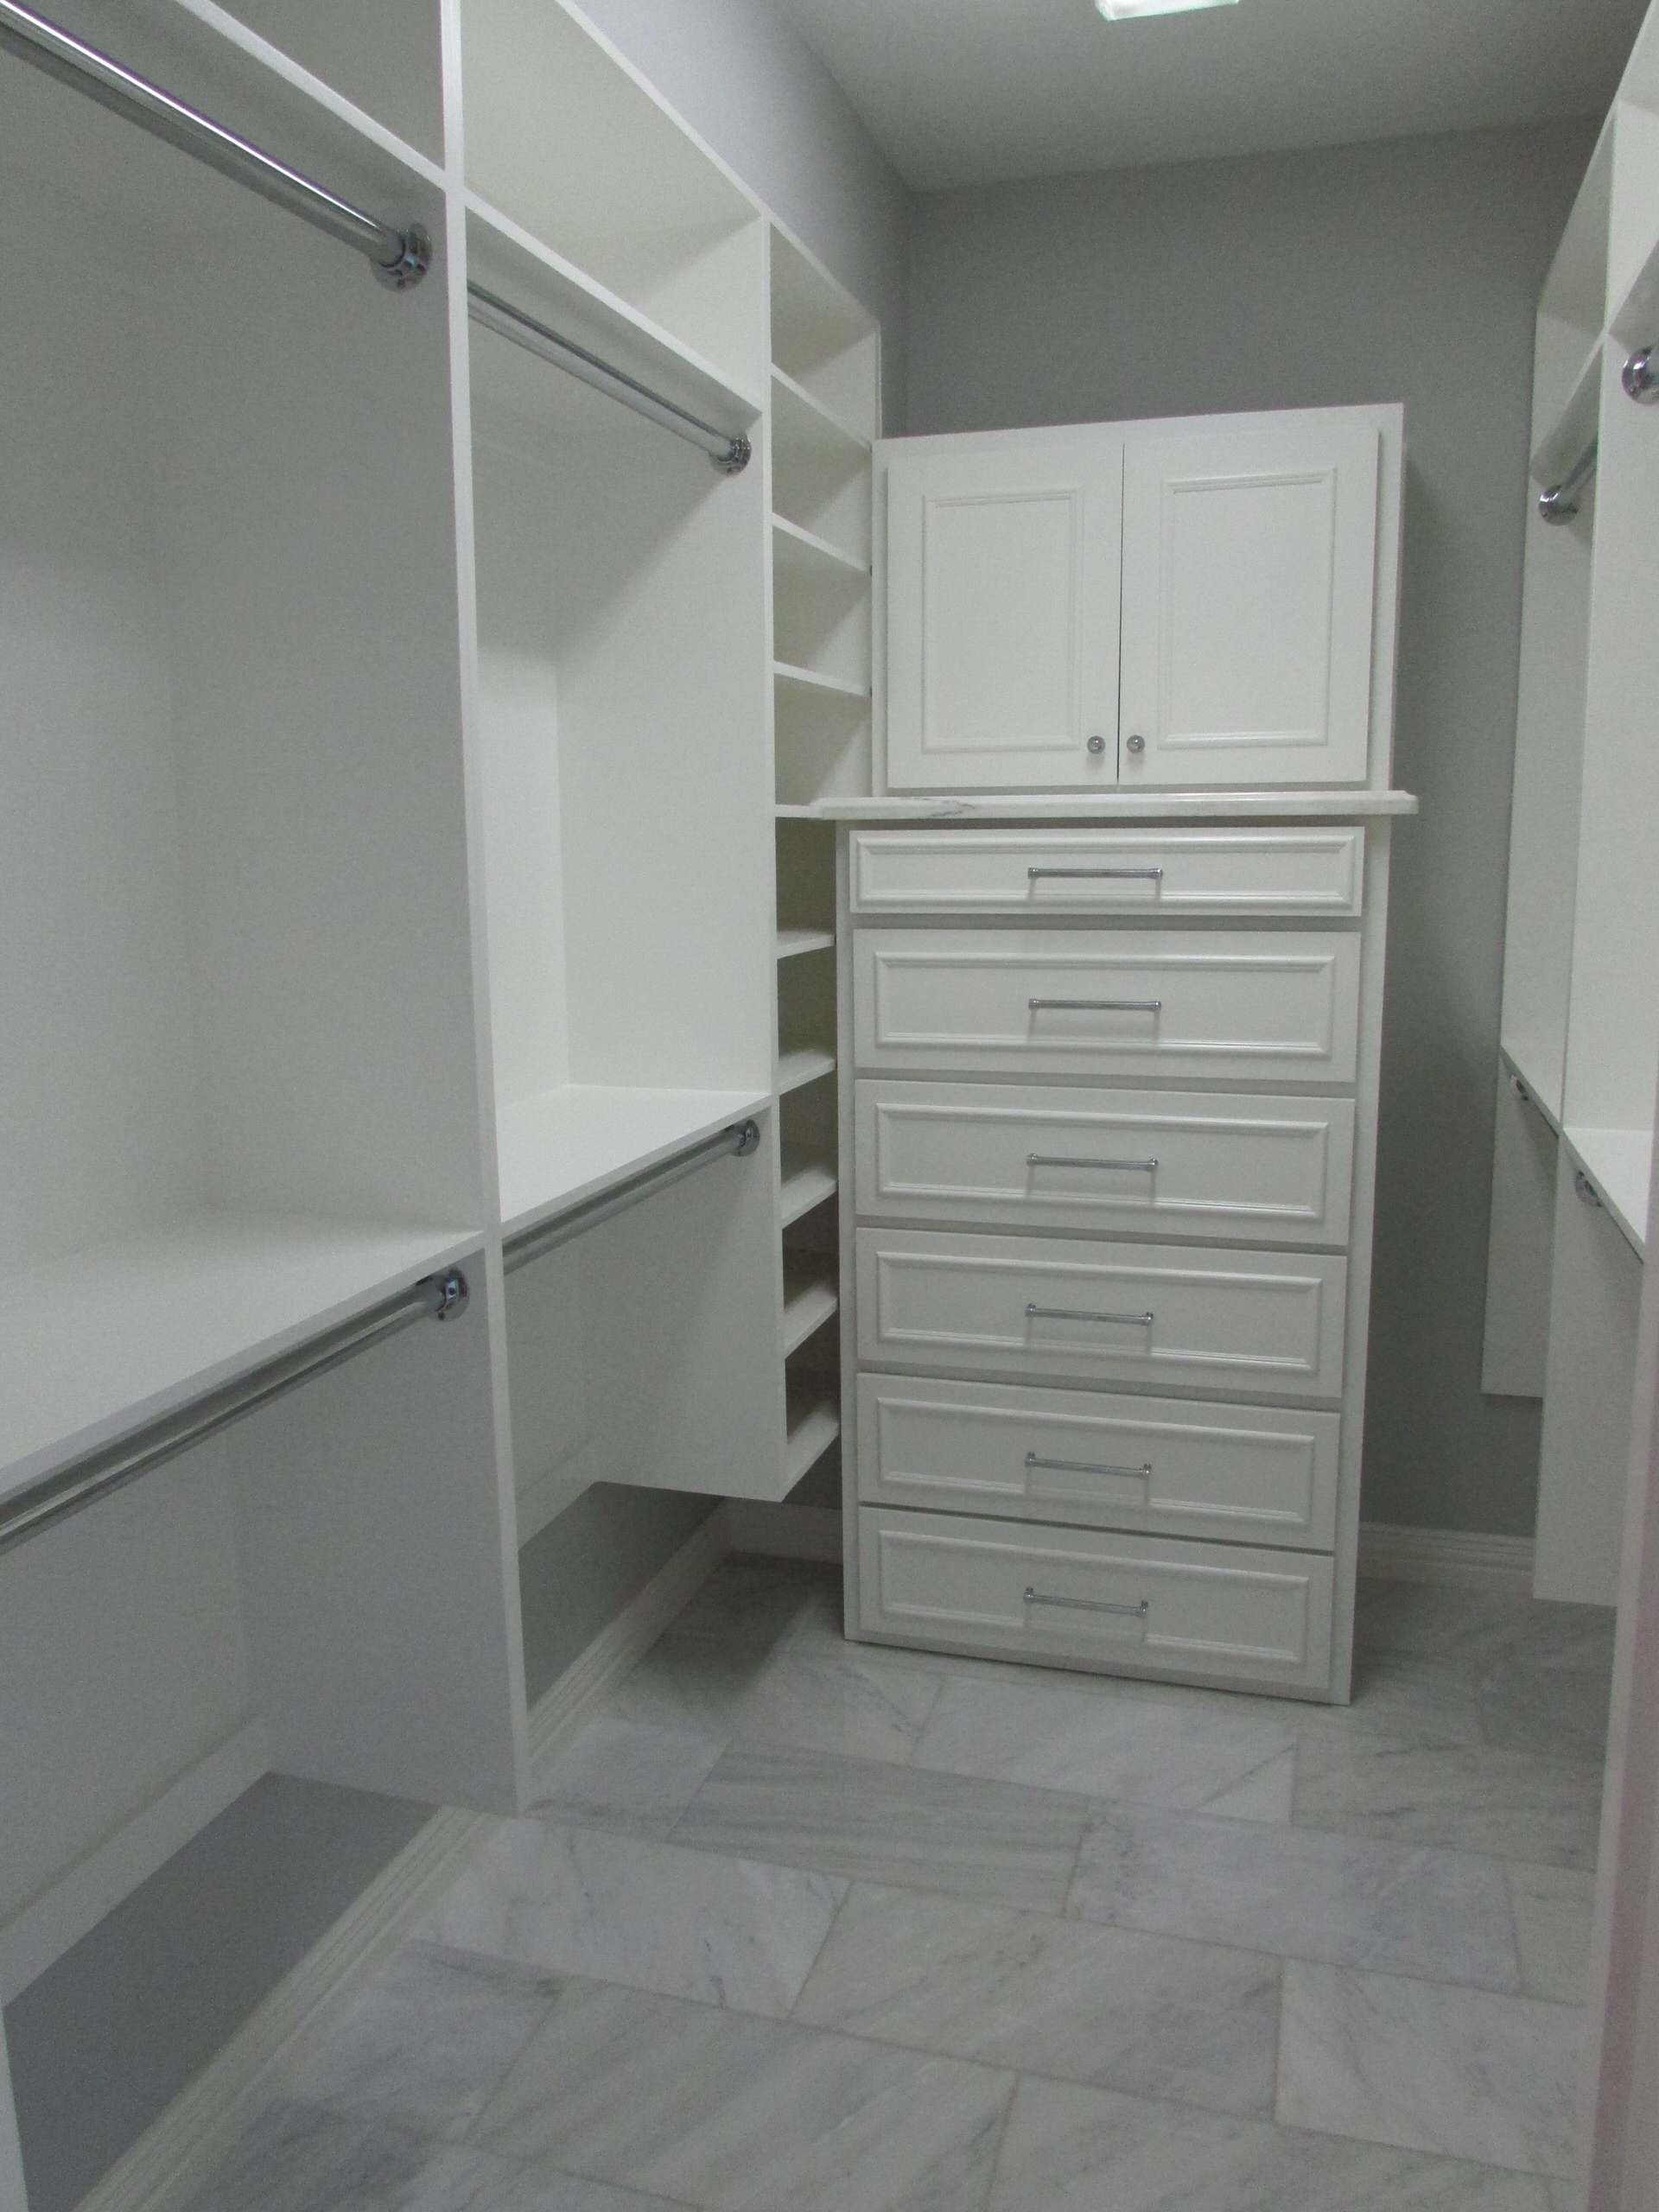 A dated Plano master bath received an updated look with a complete tear out, re-design and remodel with new custom cabinetry to include built-in dressers in closets, free standing tub with wall mounte